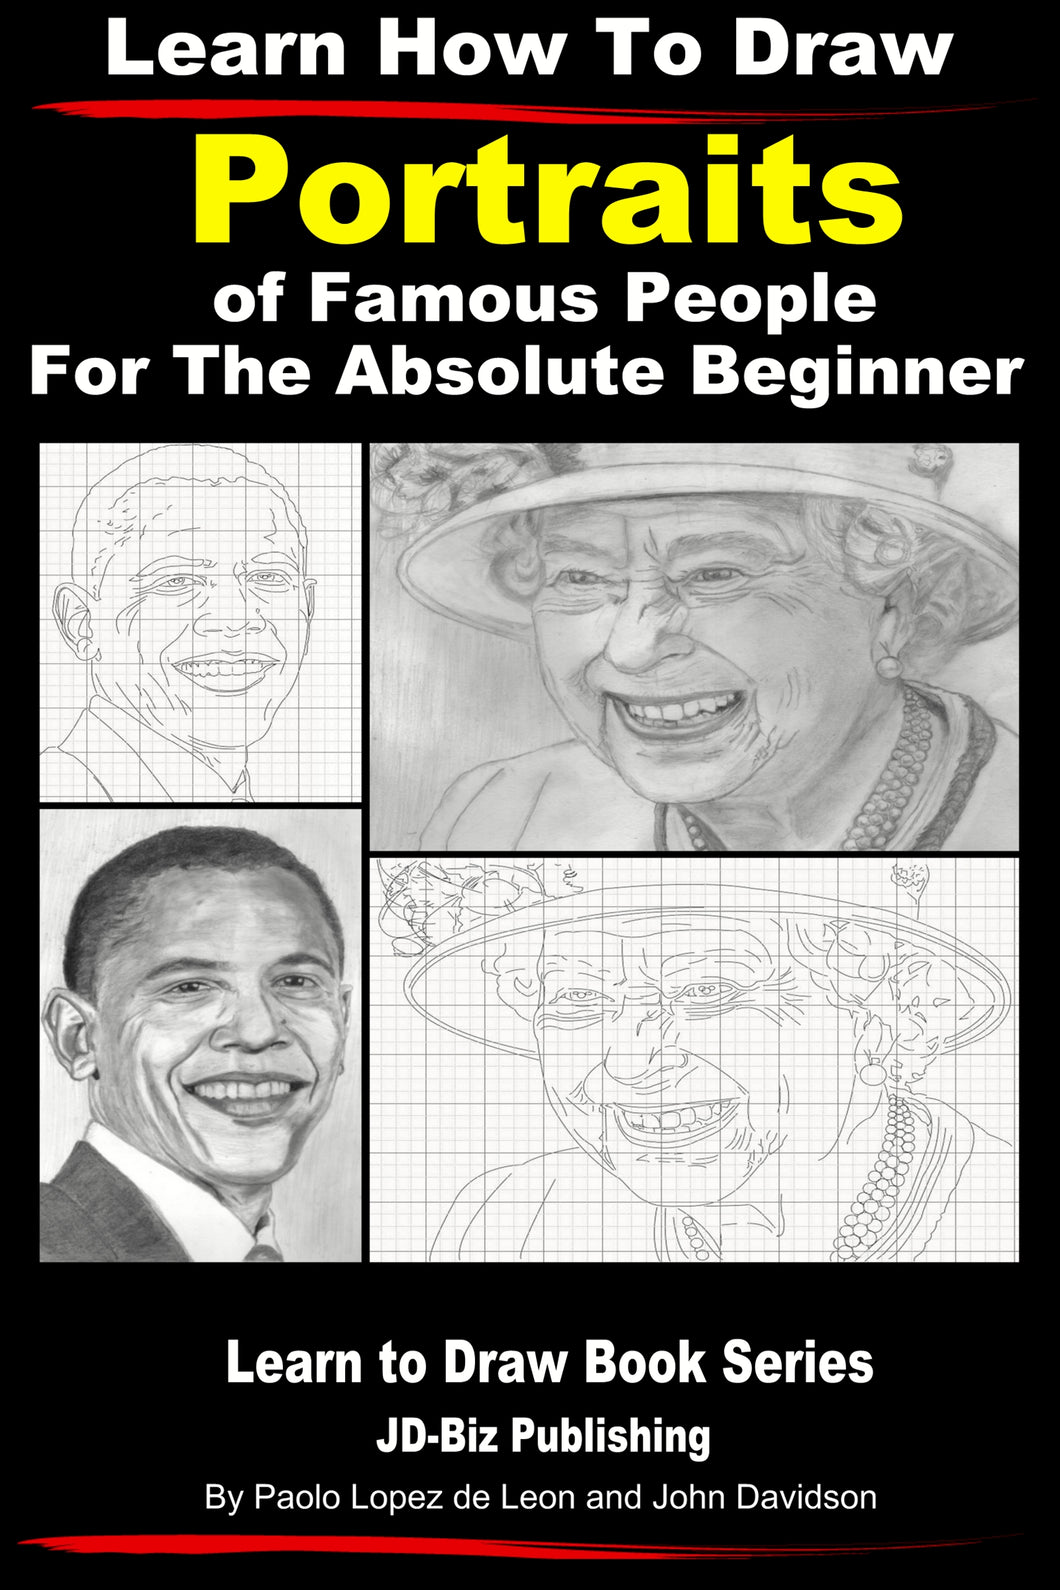 Learn How to Draw Portraits of Famous People in Pencil For the Absolute Beginner